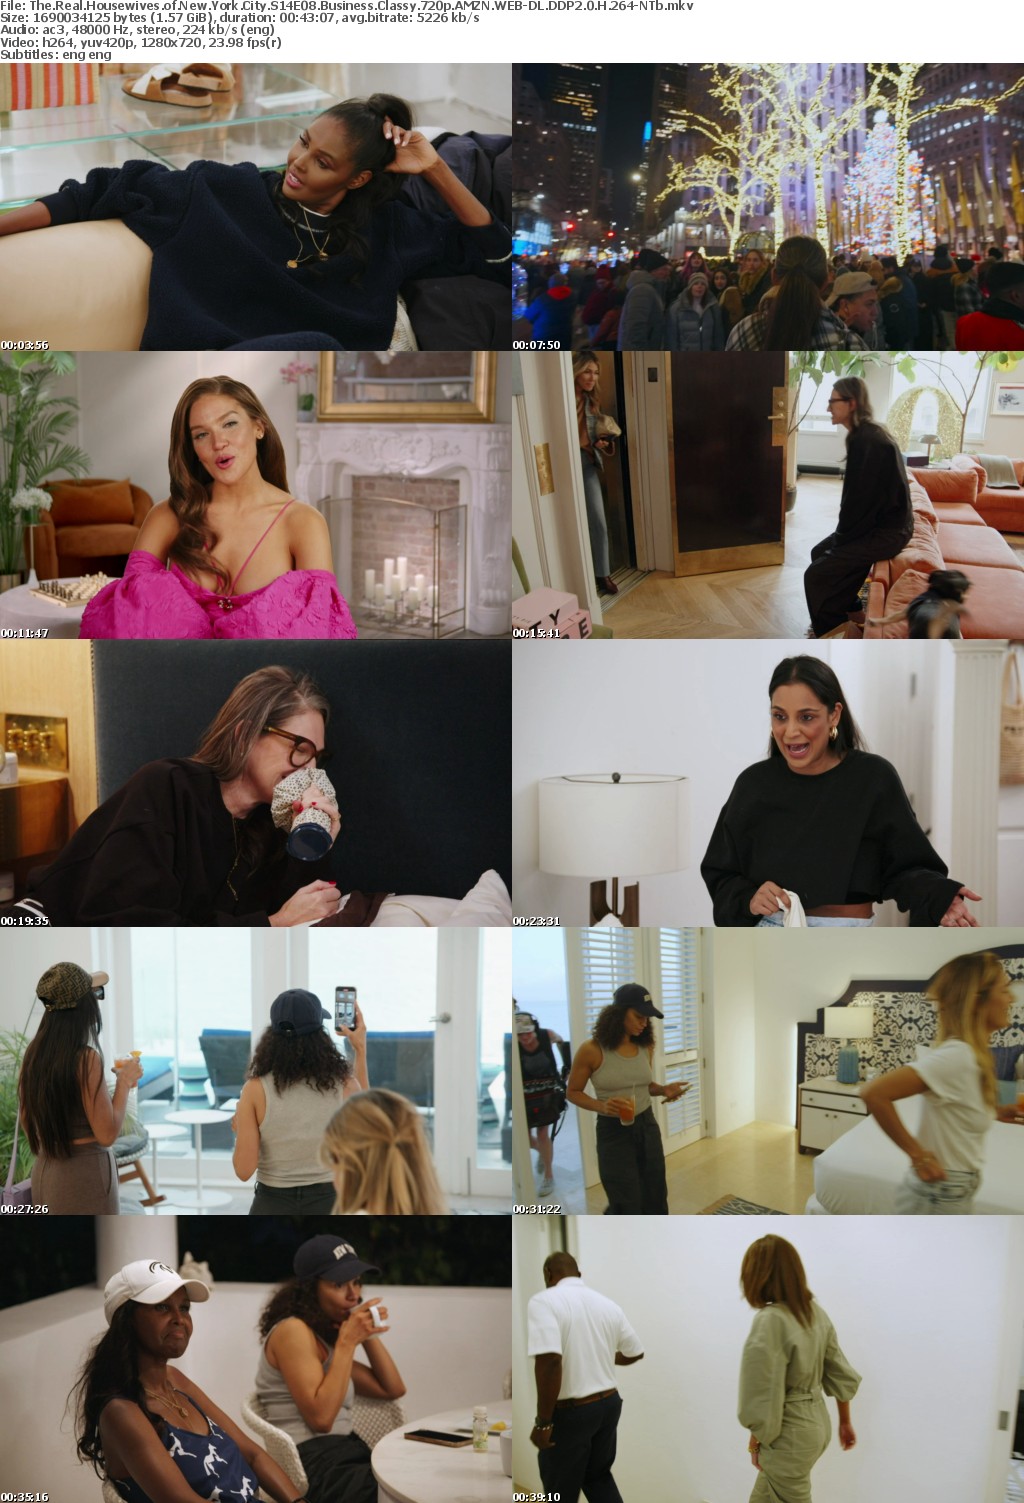 The Real Housewives of New York City S14E08 Business Classy 720p AMZN WEB-DL DDP2 0 H 264-NTb